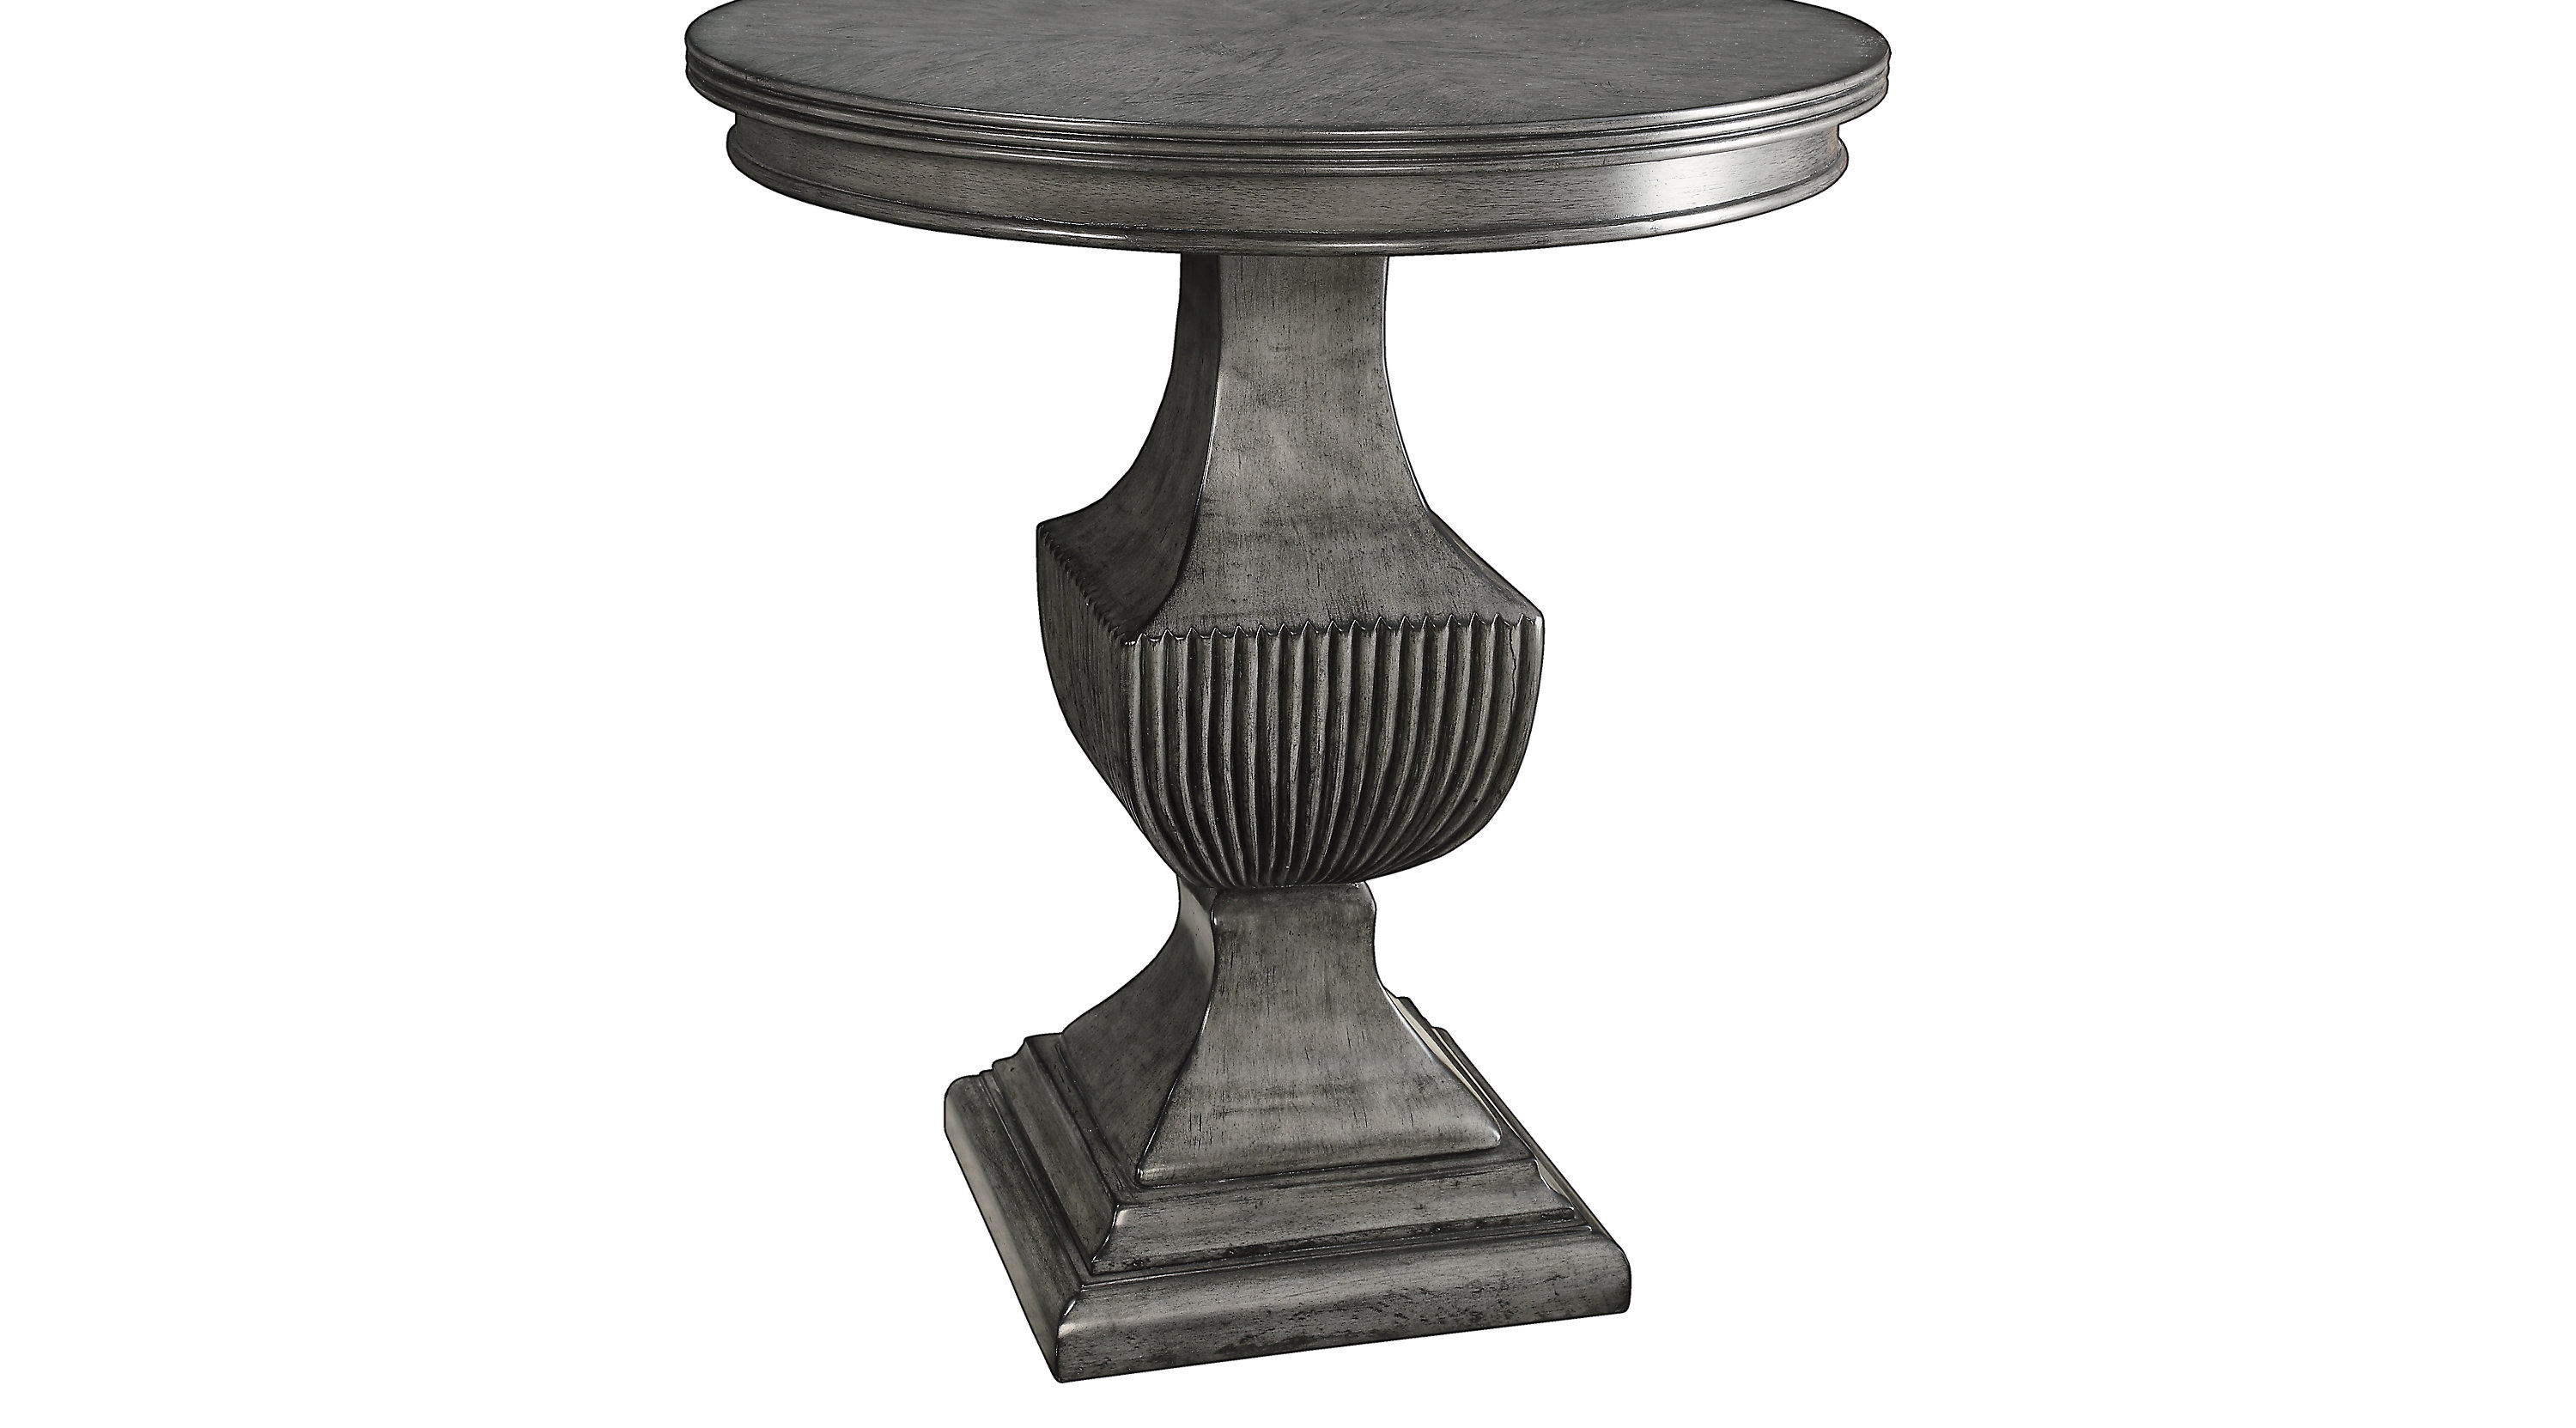 kearsley gray accent table traditional black pedestal inch end mirrored pier sofa console behind threshold brown with wicker drawers home goods patio furniture ethan allen nesting